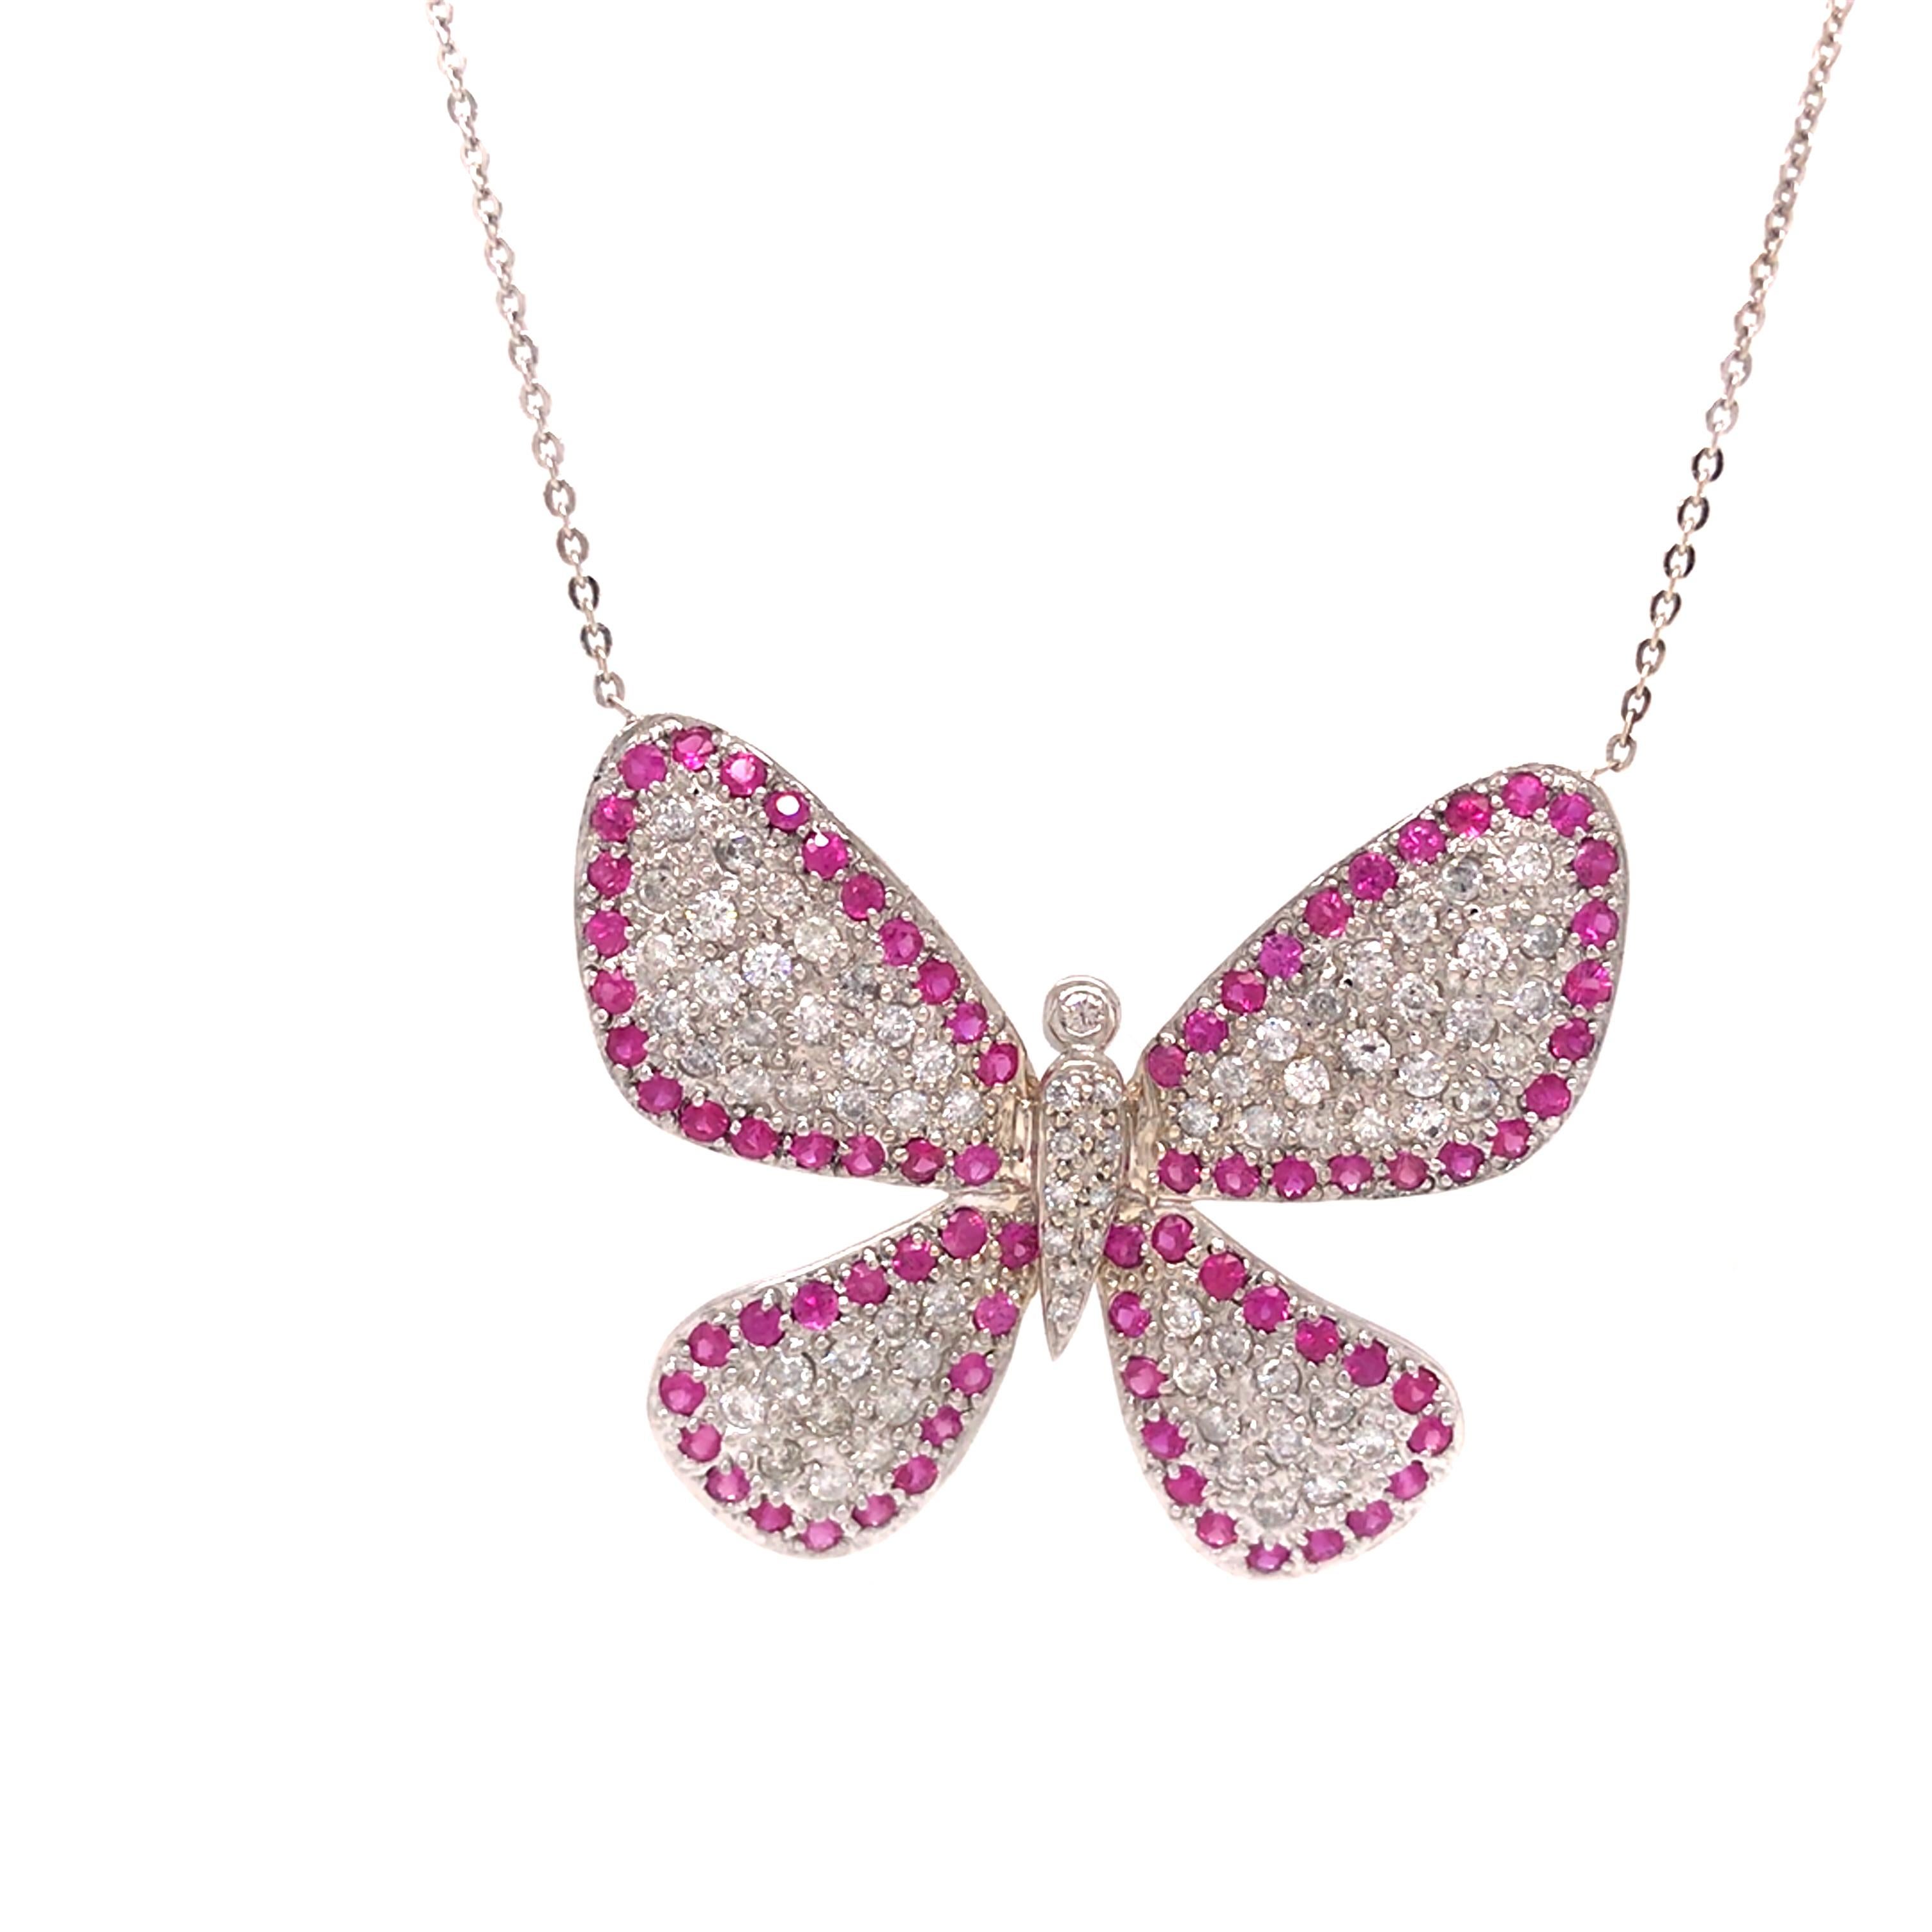 Ruby and Diamond Butterfly Pendant Necklace in 18K White Gold. Round Brilliant Cut Diamonds weighing 1.53 carat total weight, G-H in color, SI-I2 in clarity and (80) Ruby Gemstones weighing 1.60 carat total weight are expertly pave set.  The